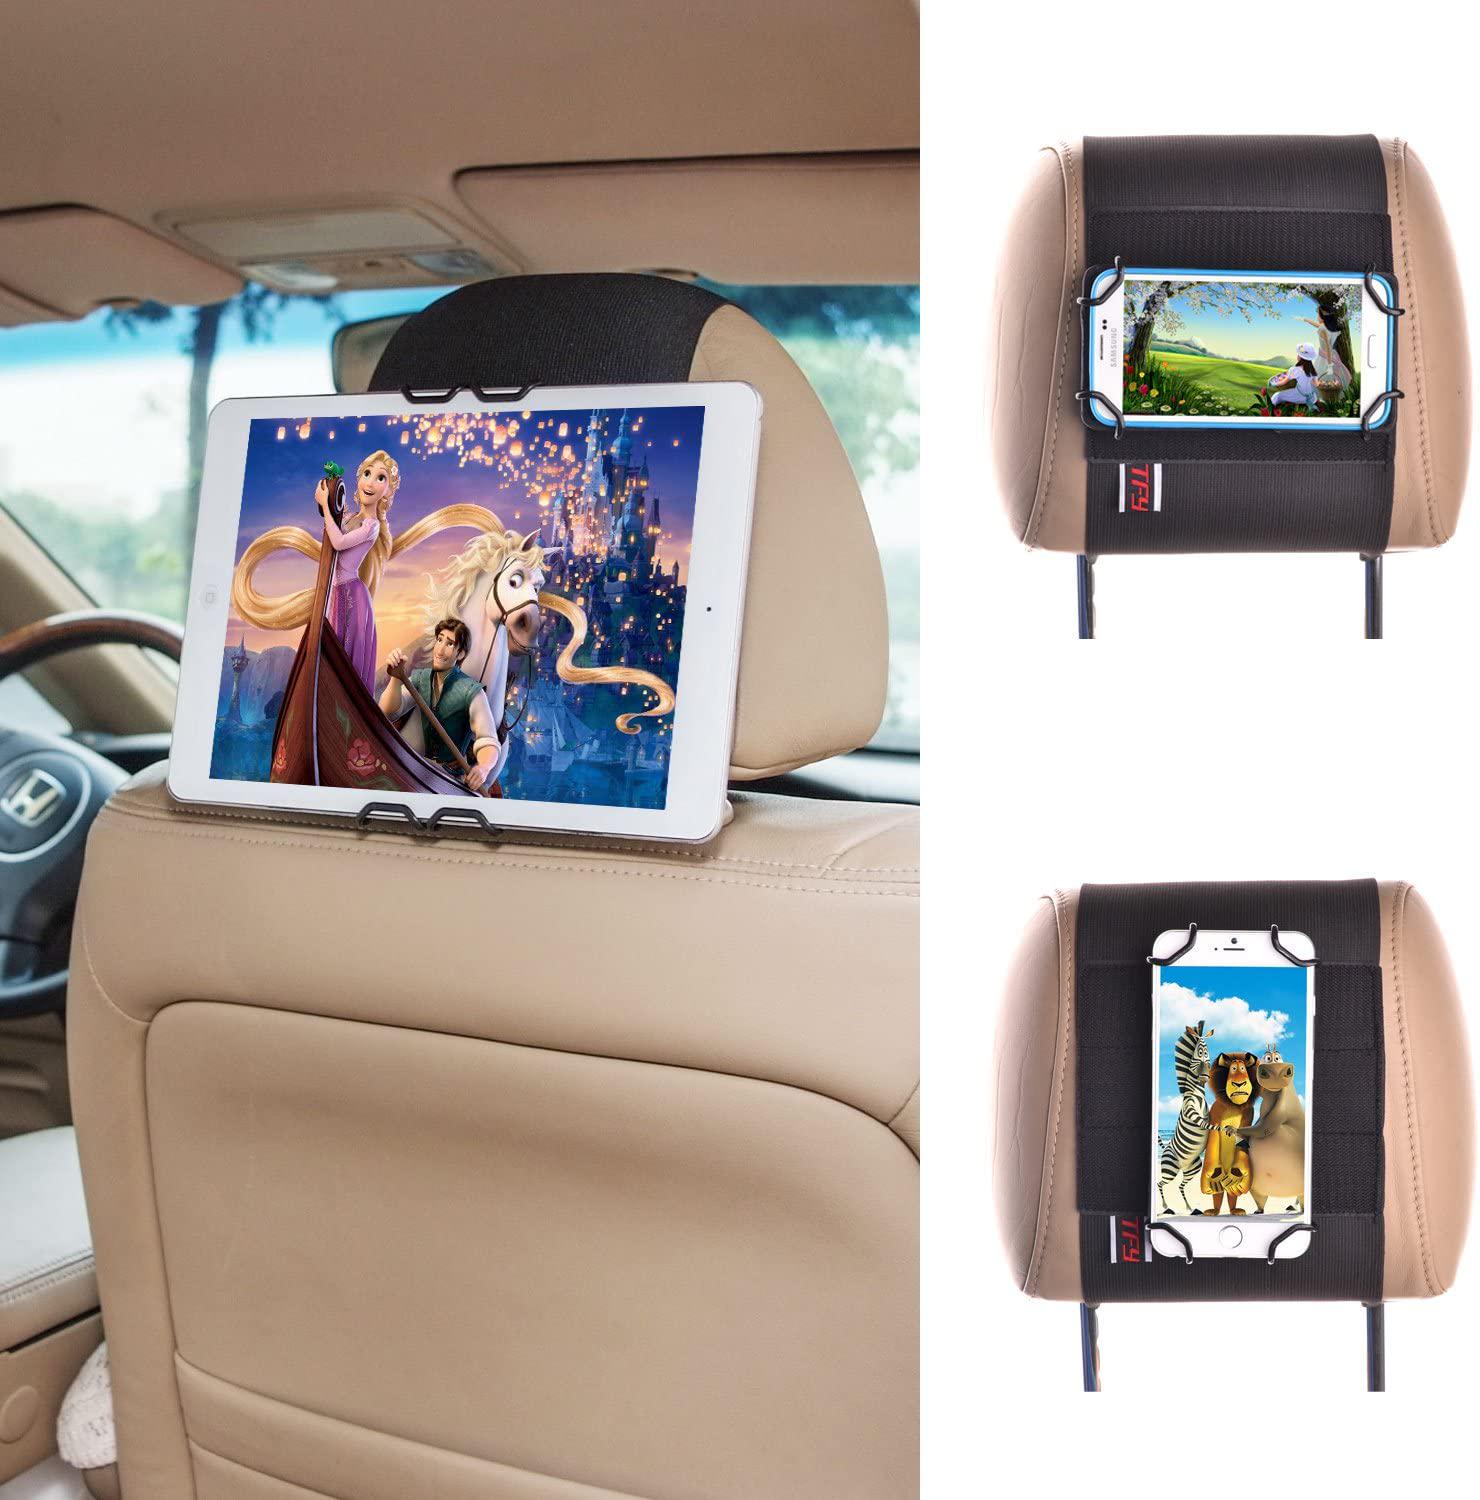 TFY, TFY Universal Smartphone and Tablet Car Headrest Mount Holder Compatible with iPhone 14 Pro Max / 14 Plus / 13 12 Pro / 11 / XS Max / 8 Plus / 7 and iPad Mini 6 - S22 / S21 - Huawei Mate 50 Pro and More